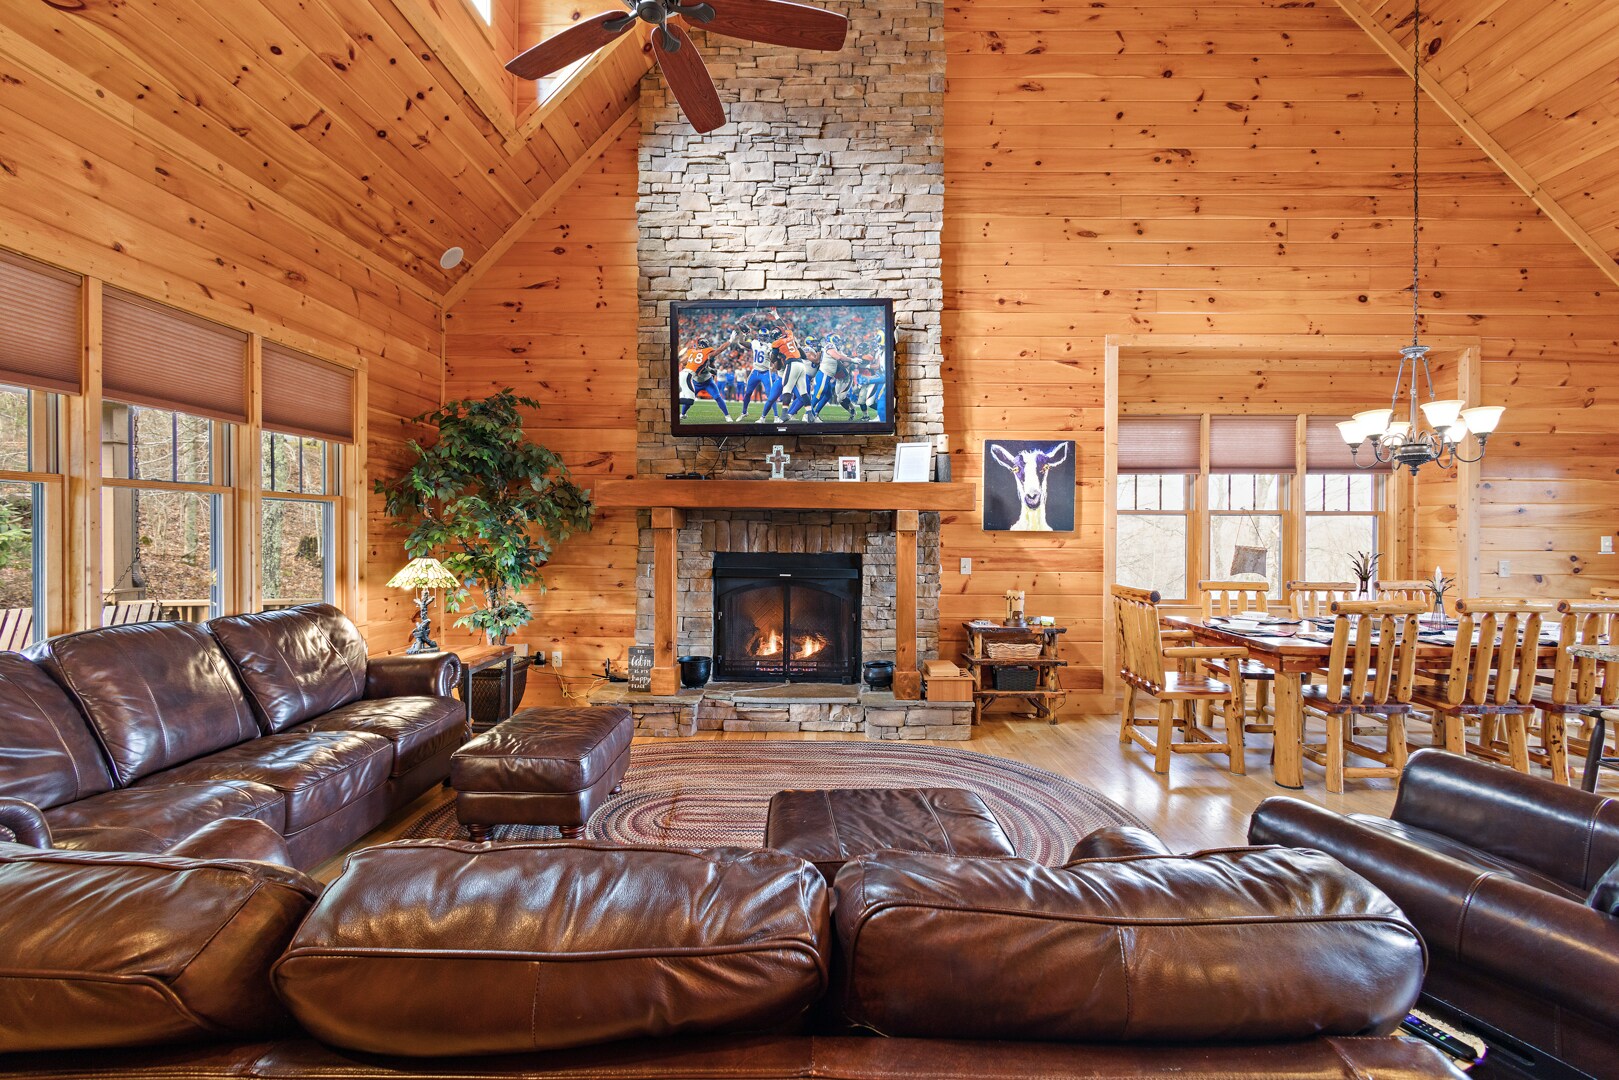 Leather Furniture and Stacked Stone Fireplace